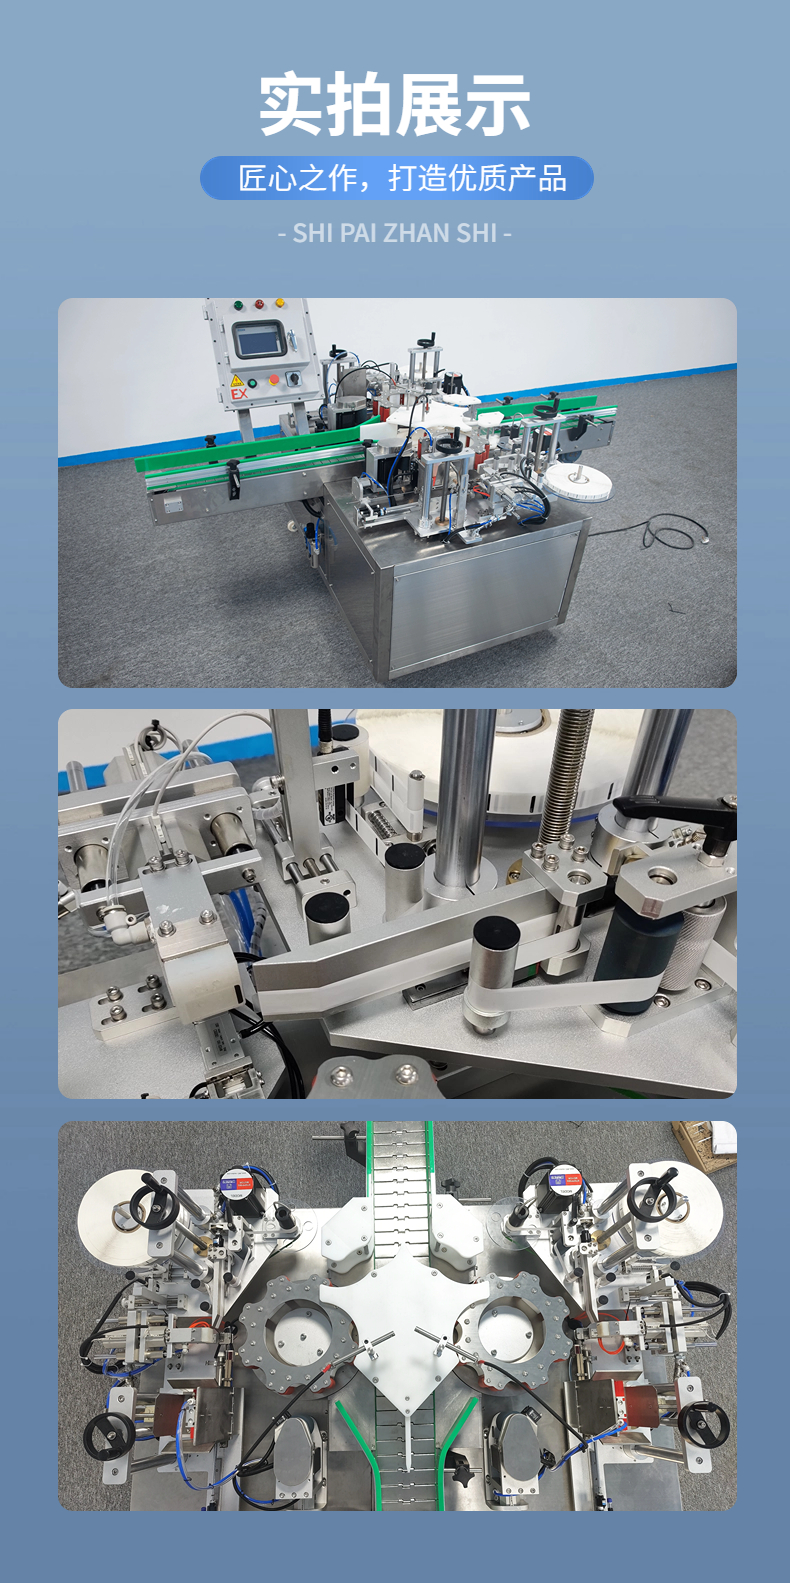 Fully automatic aerosol small red tube and small tube sticking machine, aerosol bottle sticking machine, seamless docking production line